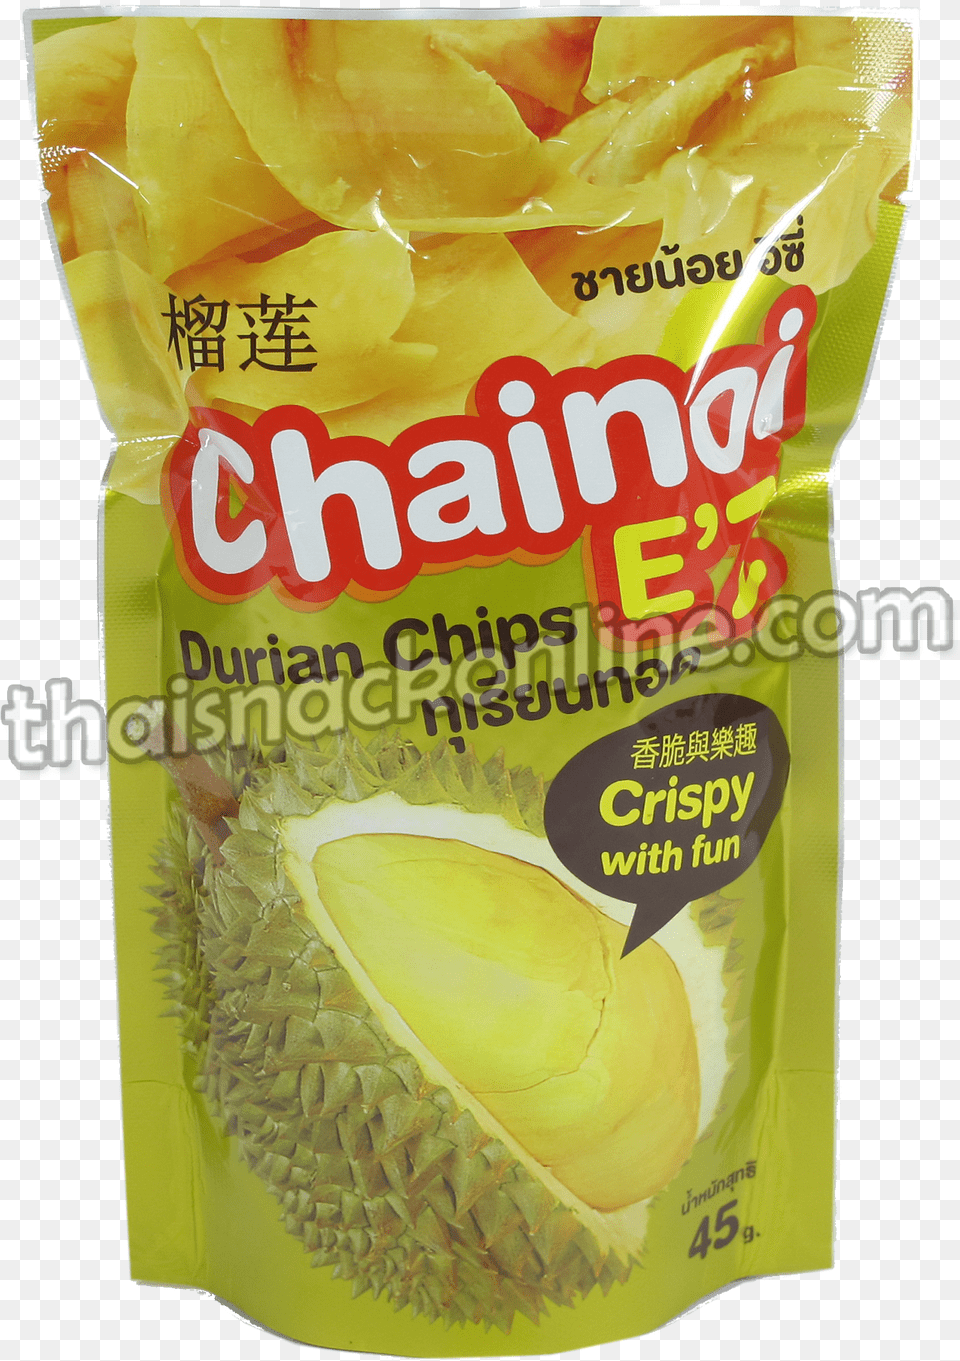 Durian Chips French Fries, Food, Fruit, Plant, Produce Png Image